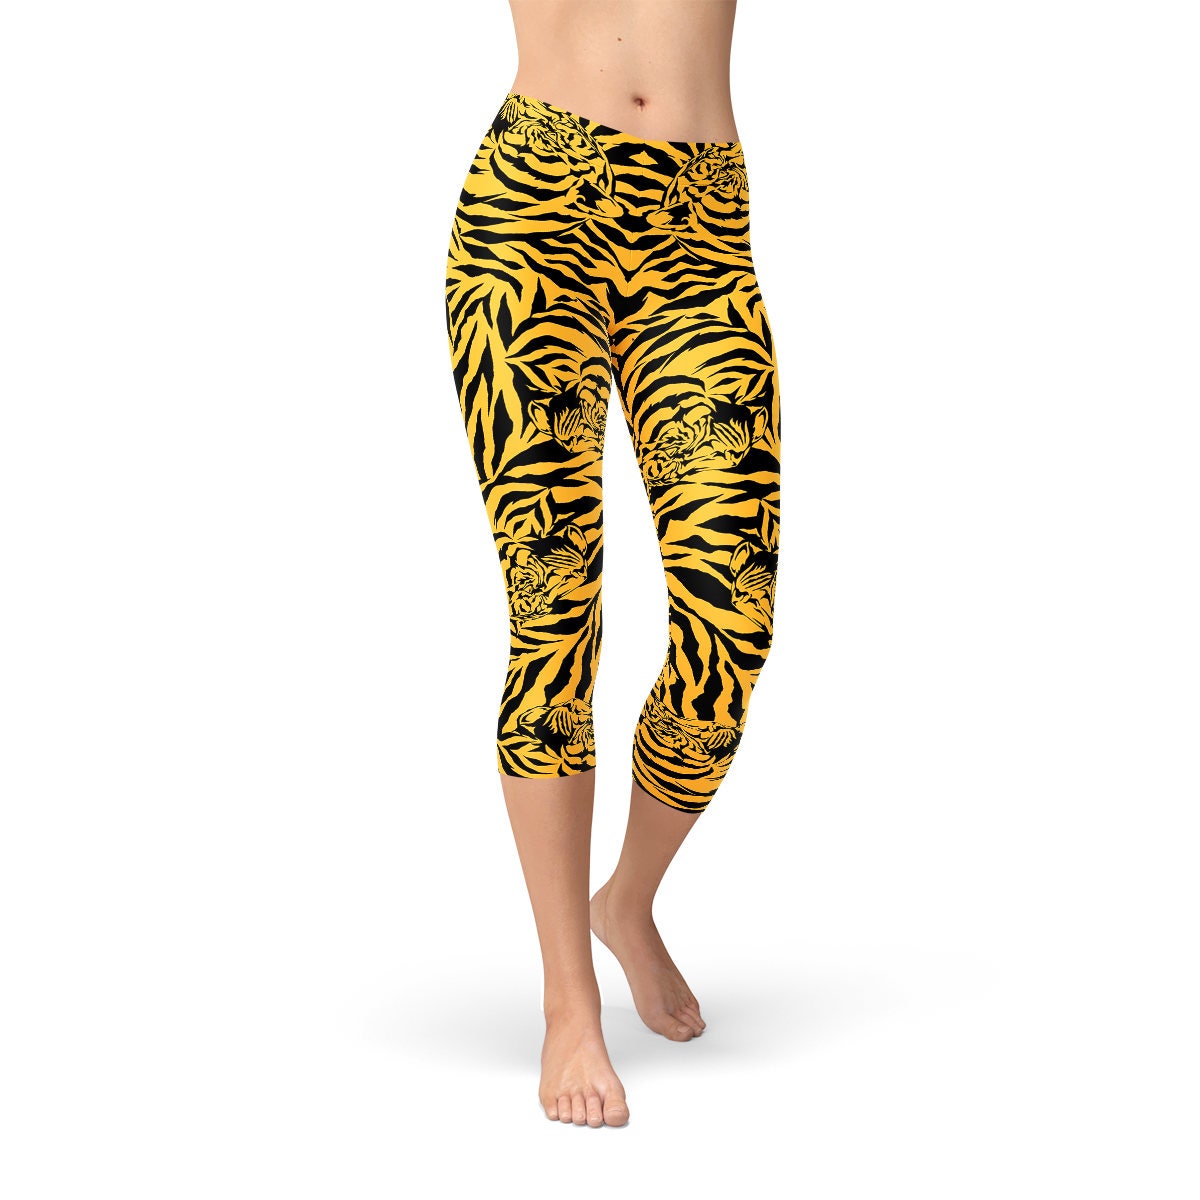 Tiger Stripes Leggings for Women Mid Waisted Yellow Pants with